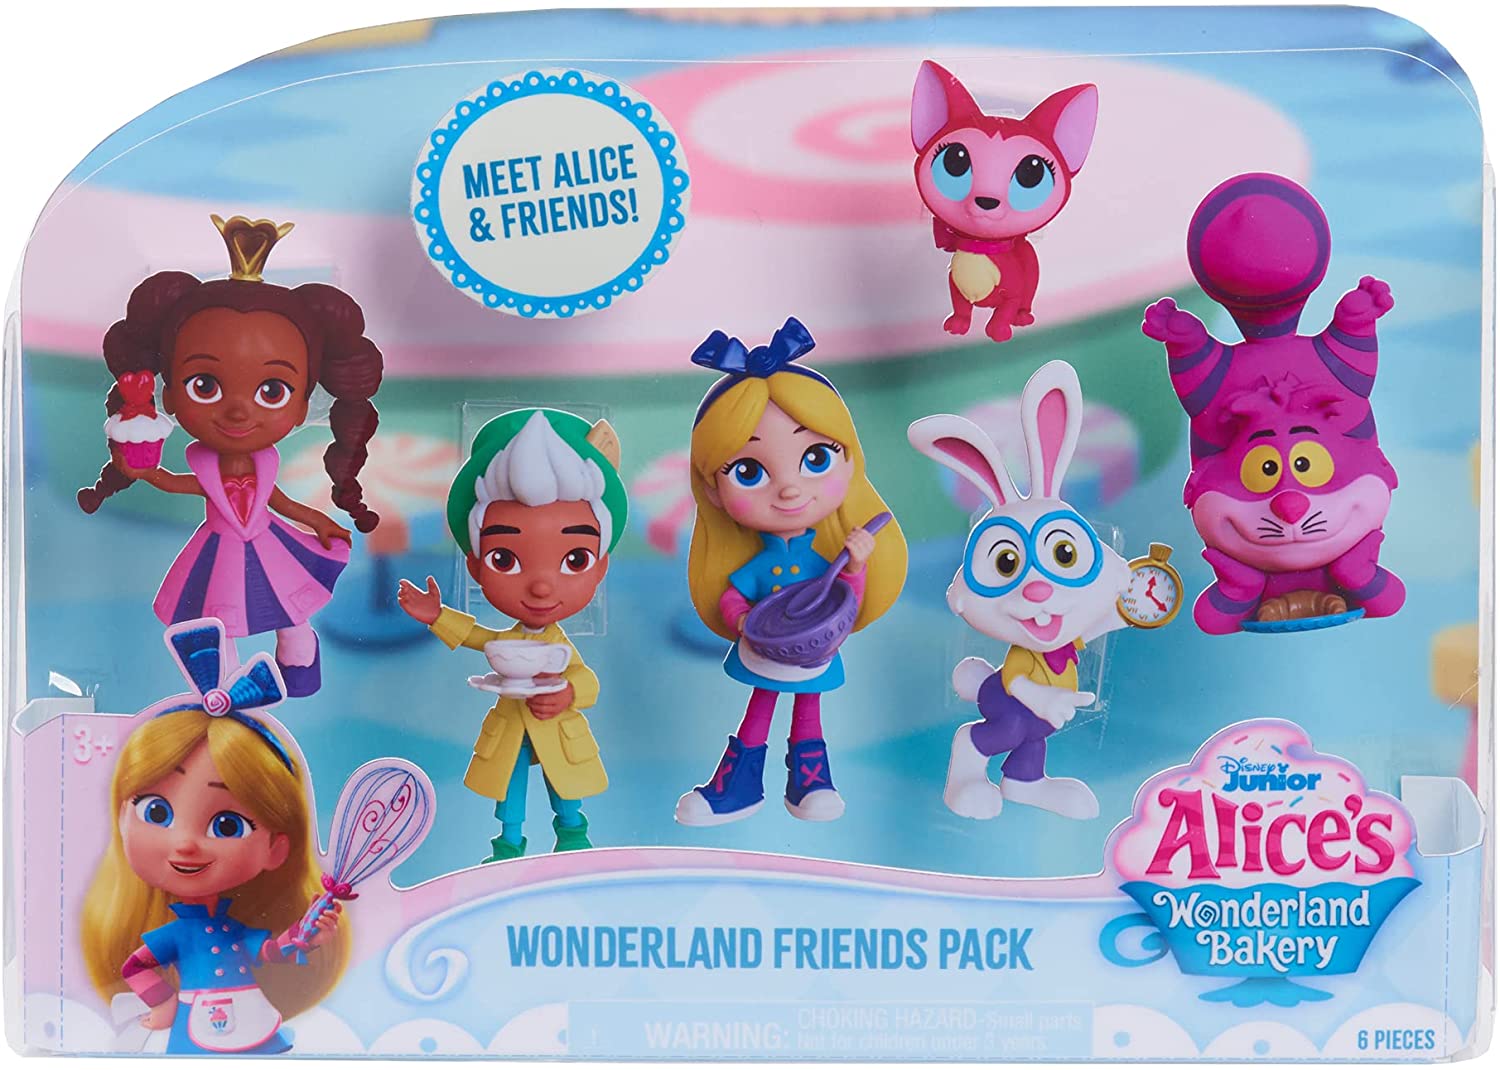 Disney Junior Alice's Wonderland Bakery 10-inch Alice & Magical Oven Doll  and Accesory Set, Officially Licensed Kids Toys for Ages 3 Up by Just Play  : Toys & Games 